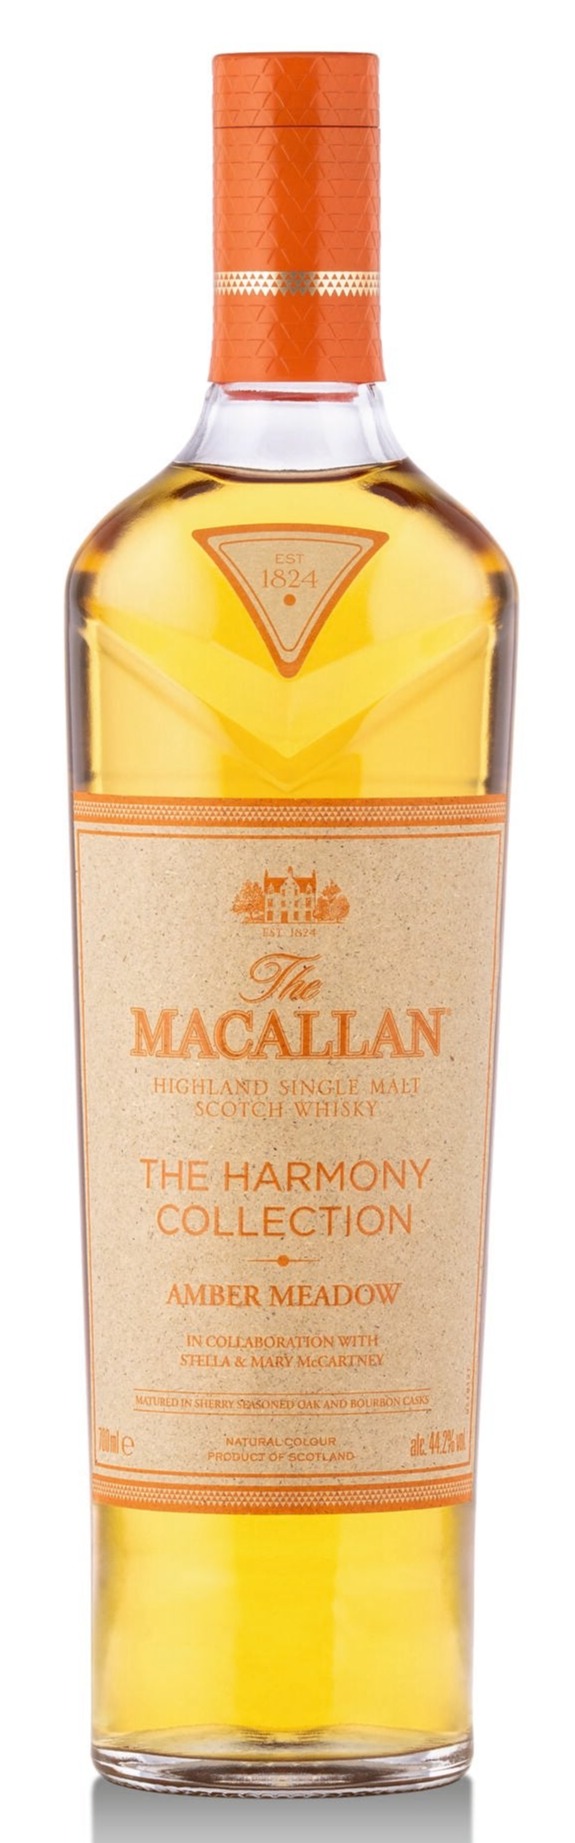 MACALLAN HARMONY COLLECTION AMBER MEADOW 44.2% 70CL